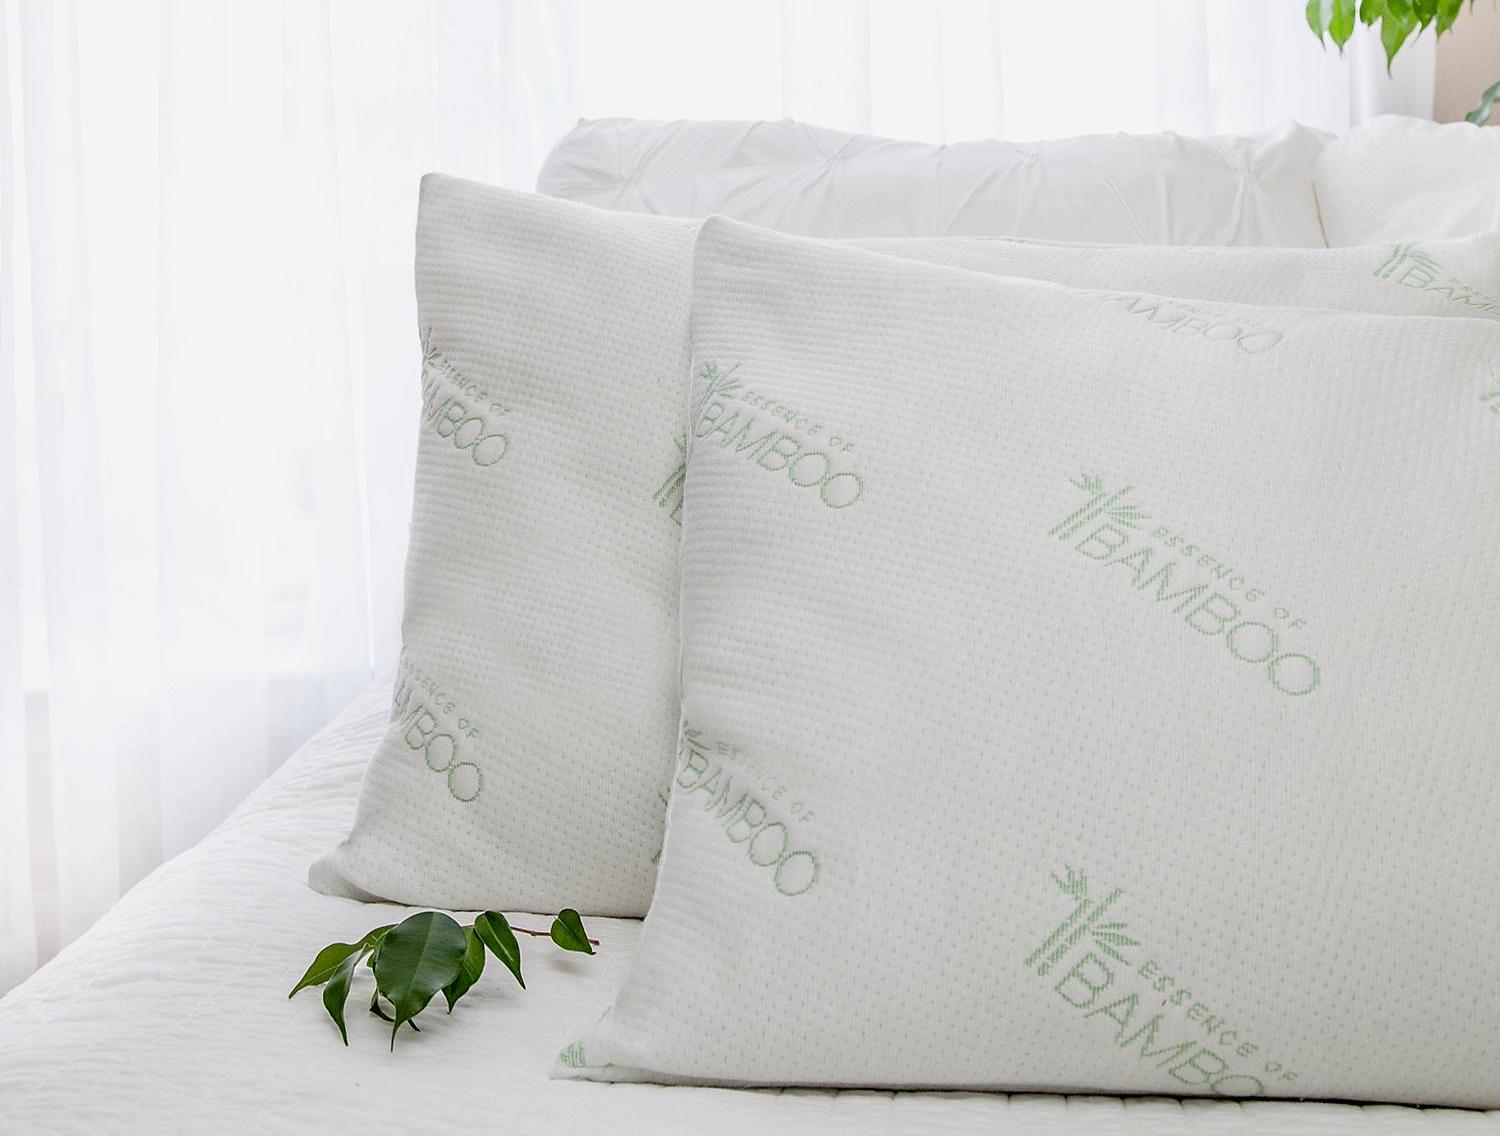 Essence of Bamboo or Copper Pillows 2 